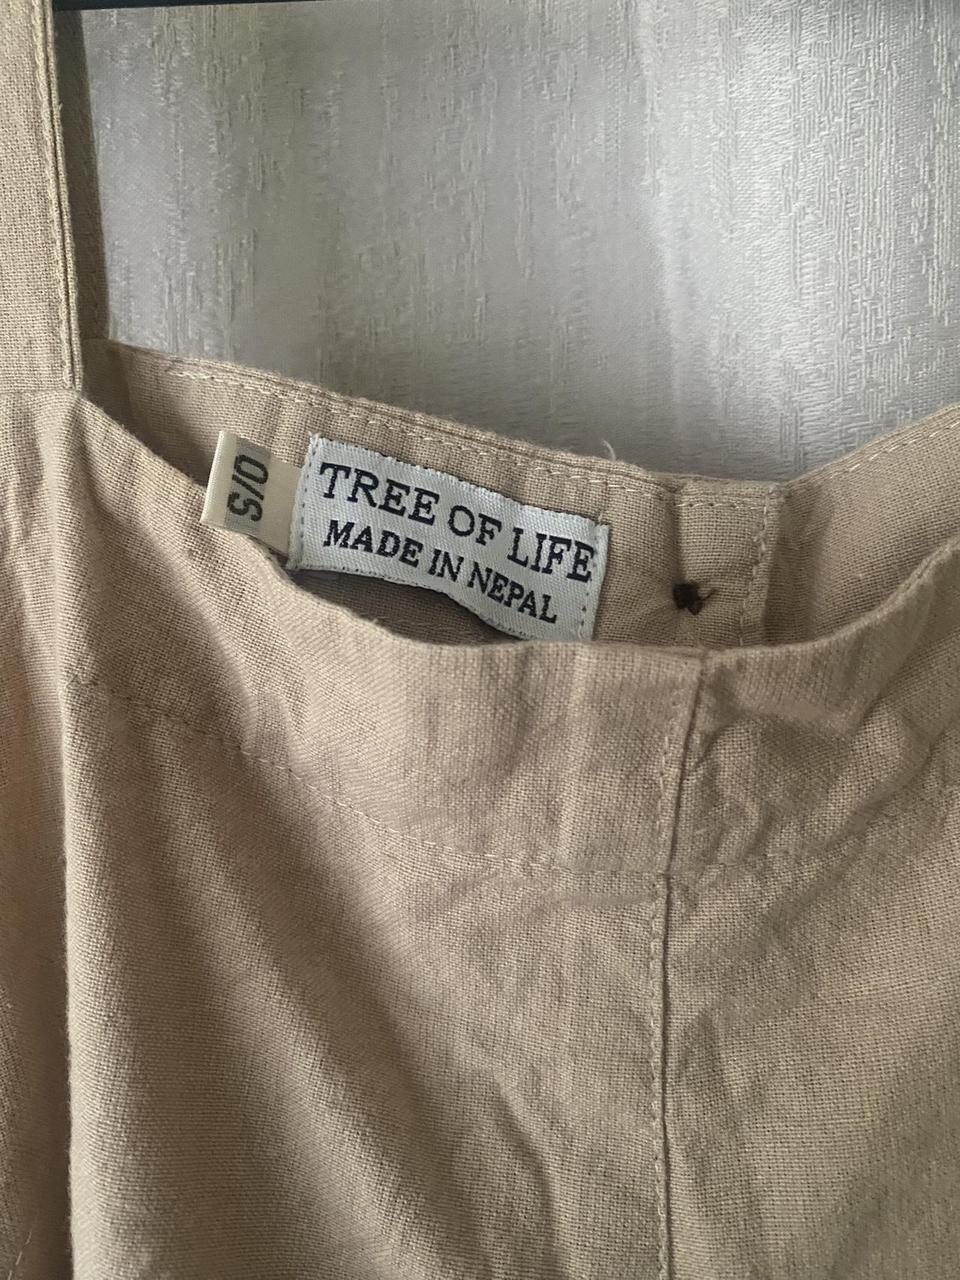 Tree of Life Wide leg dungarees with pockets. Cotton... - Depop